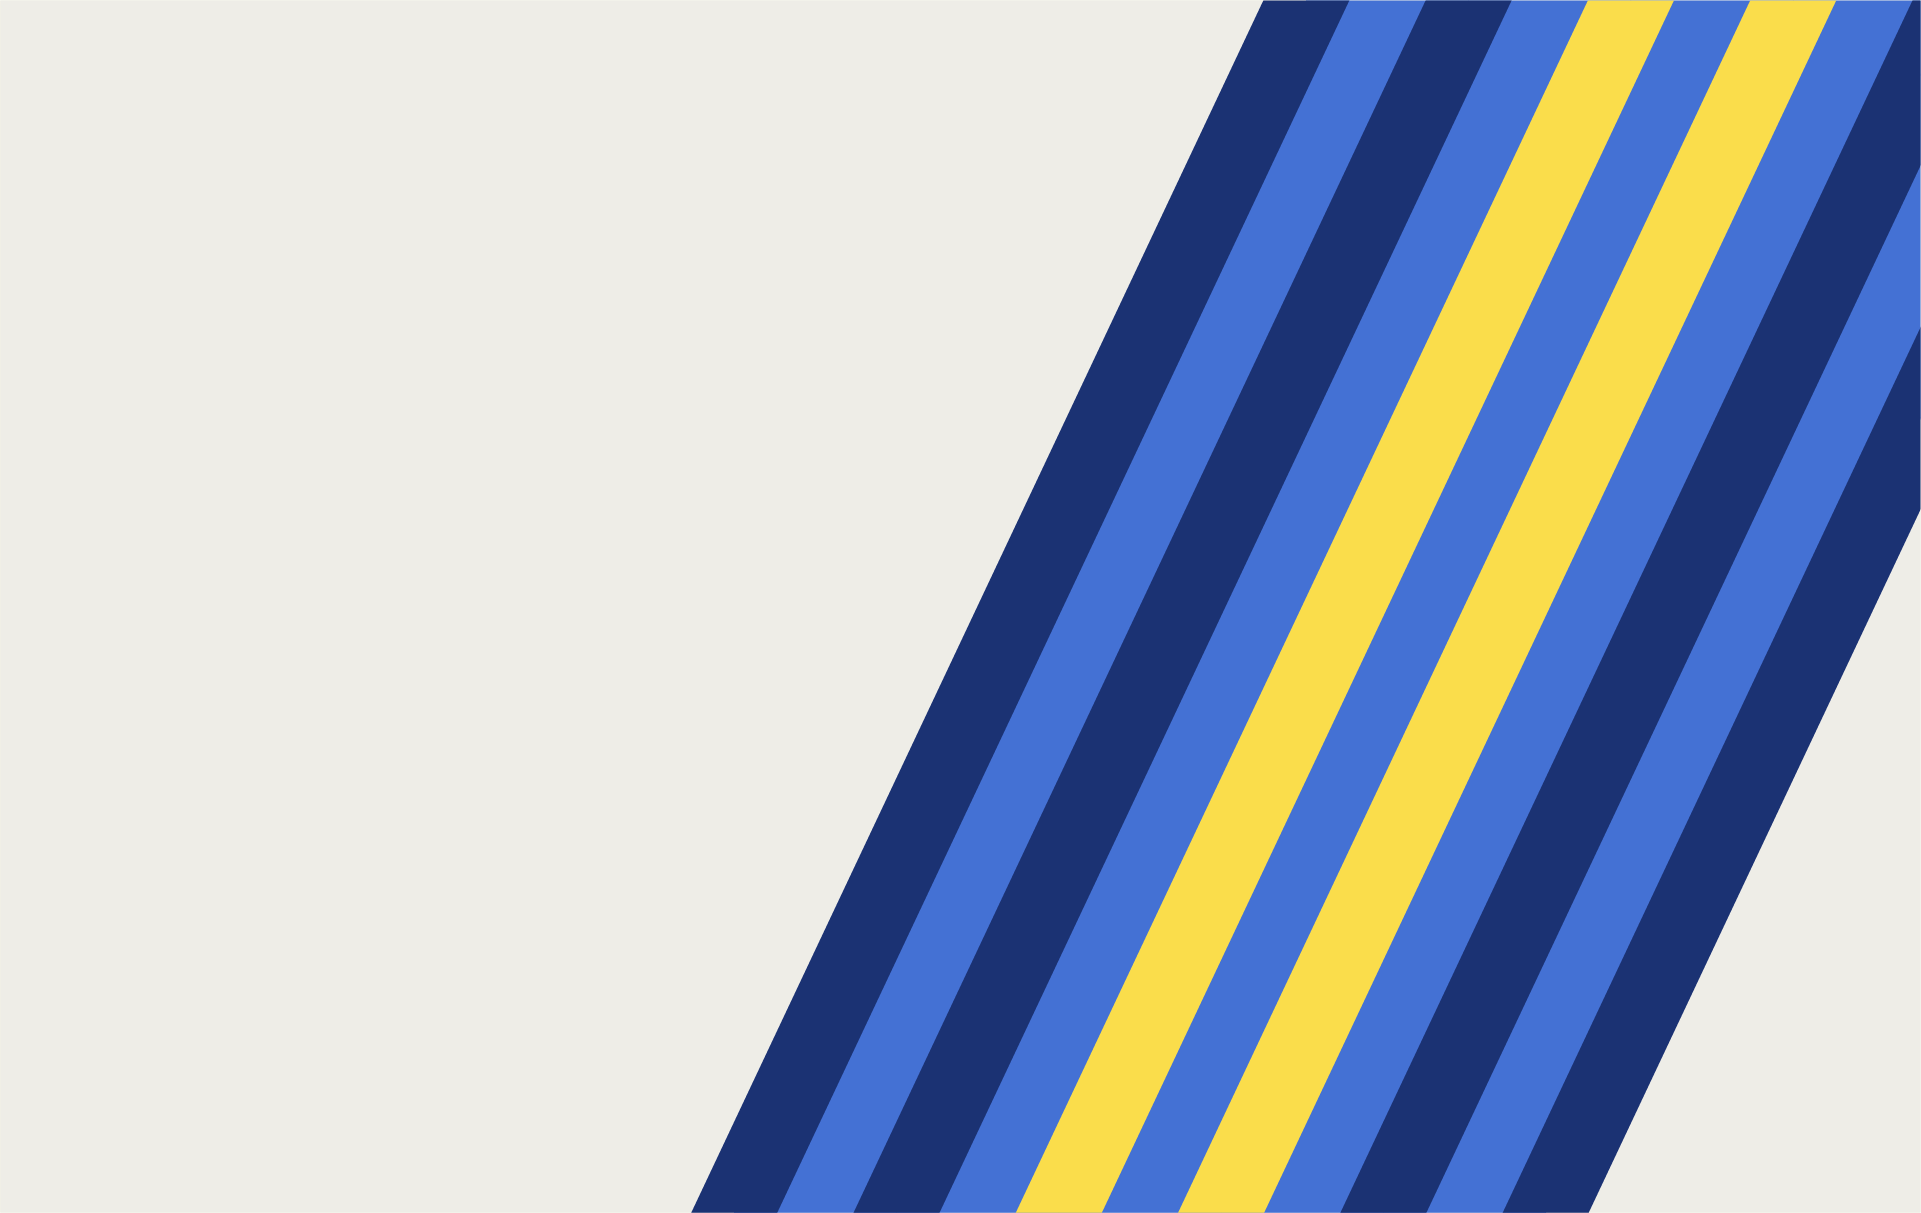 Clickable graphic for the Boston Marathon Guide, with blue and yellow stripes